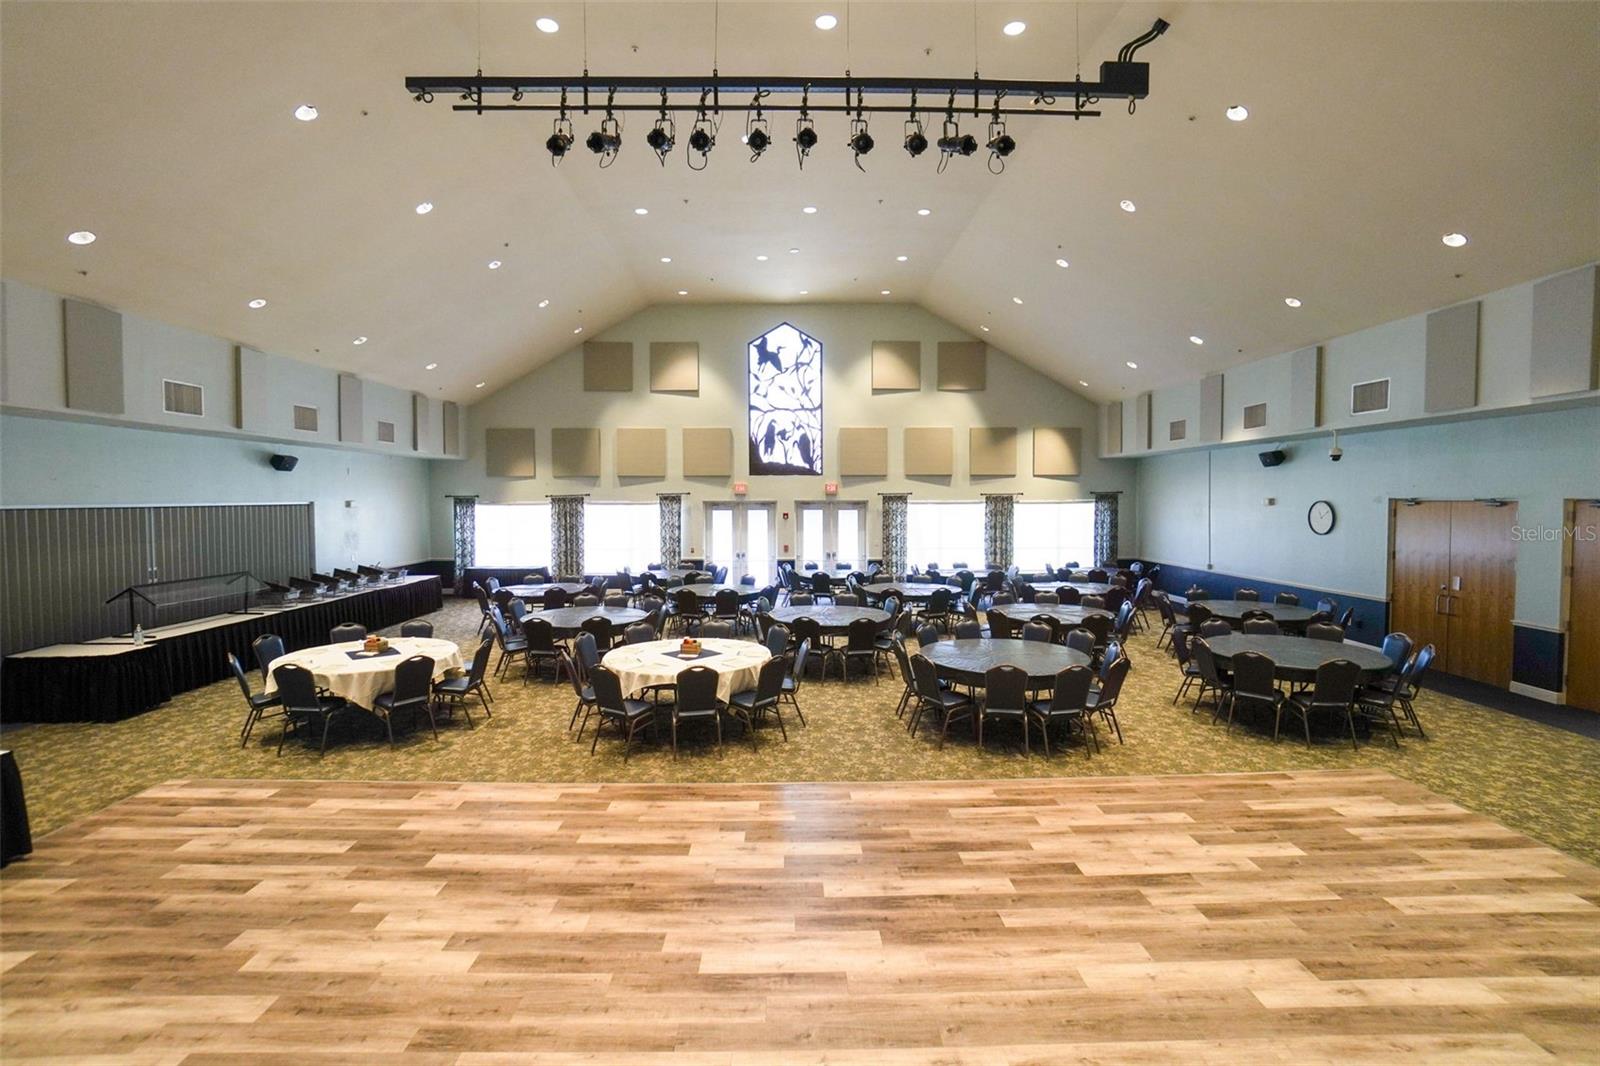 View of Banquet Hall from the stage.